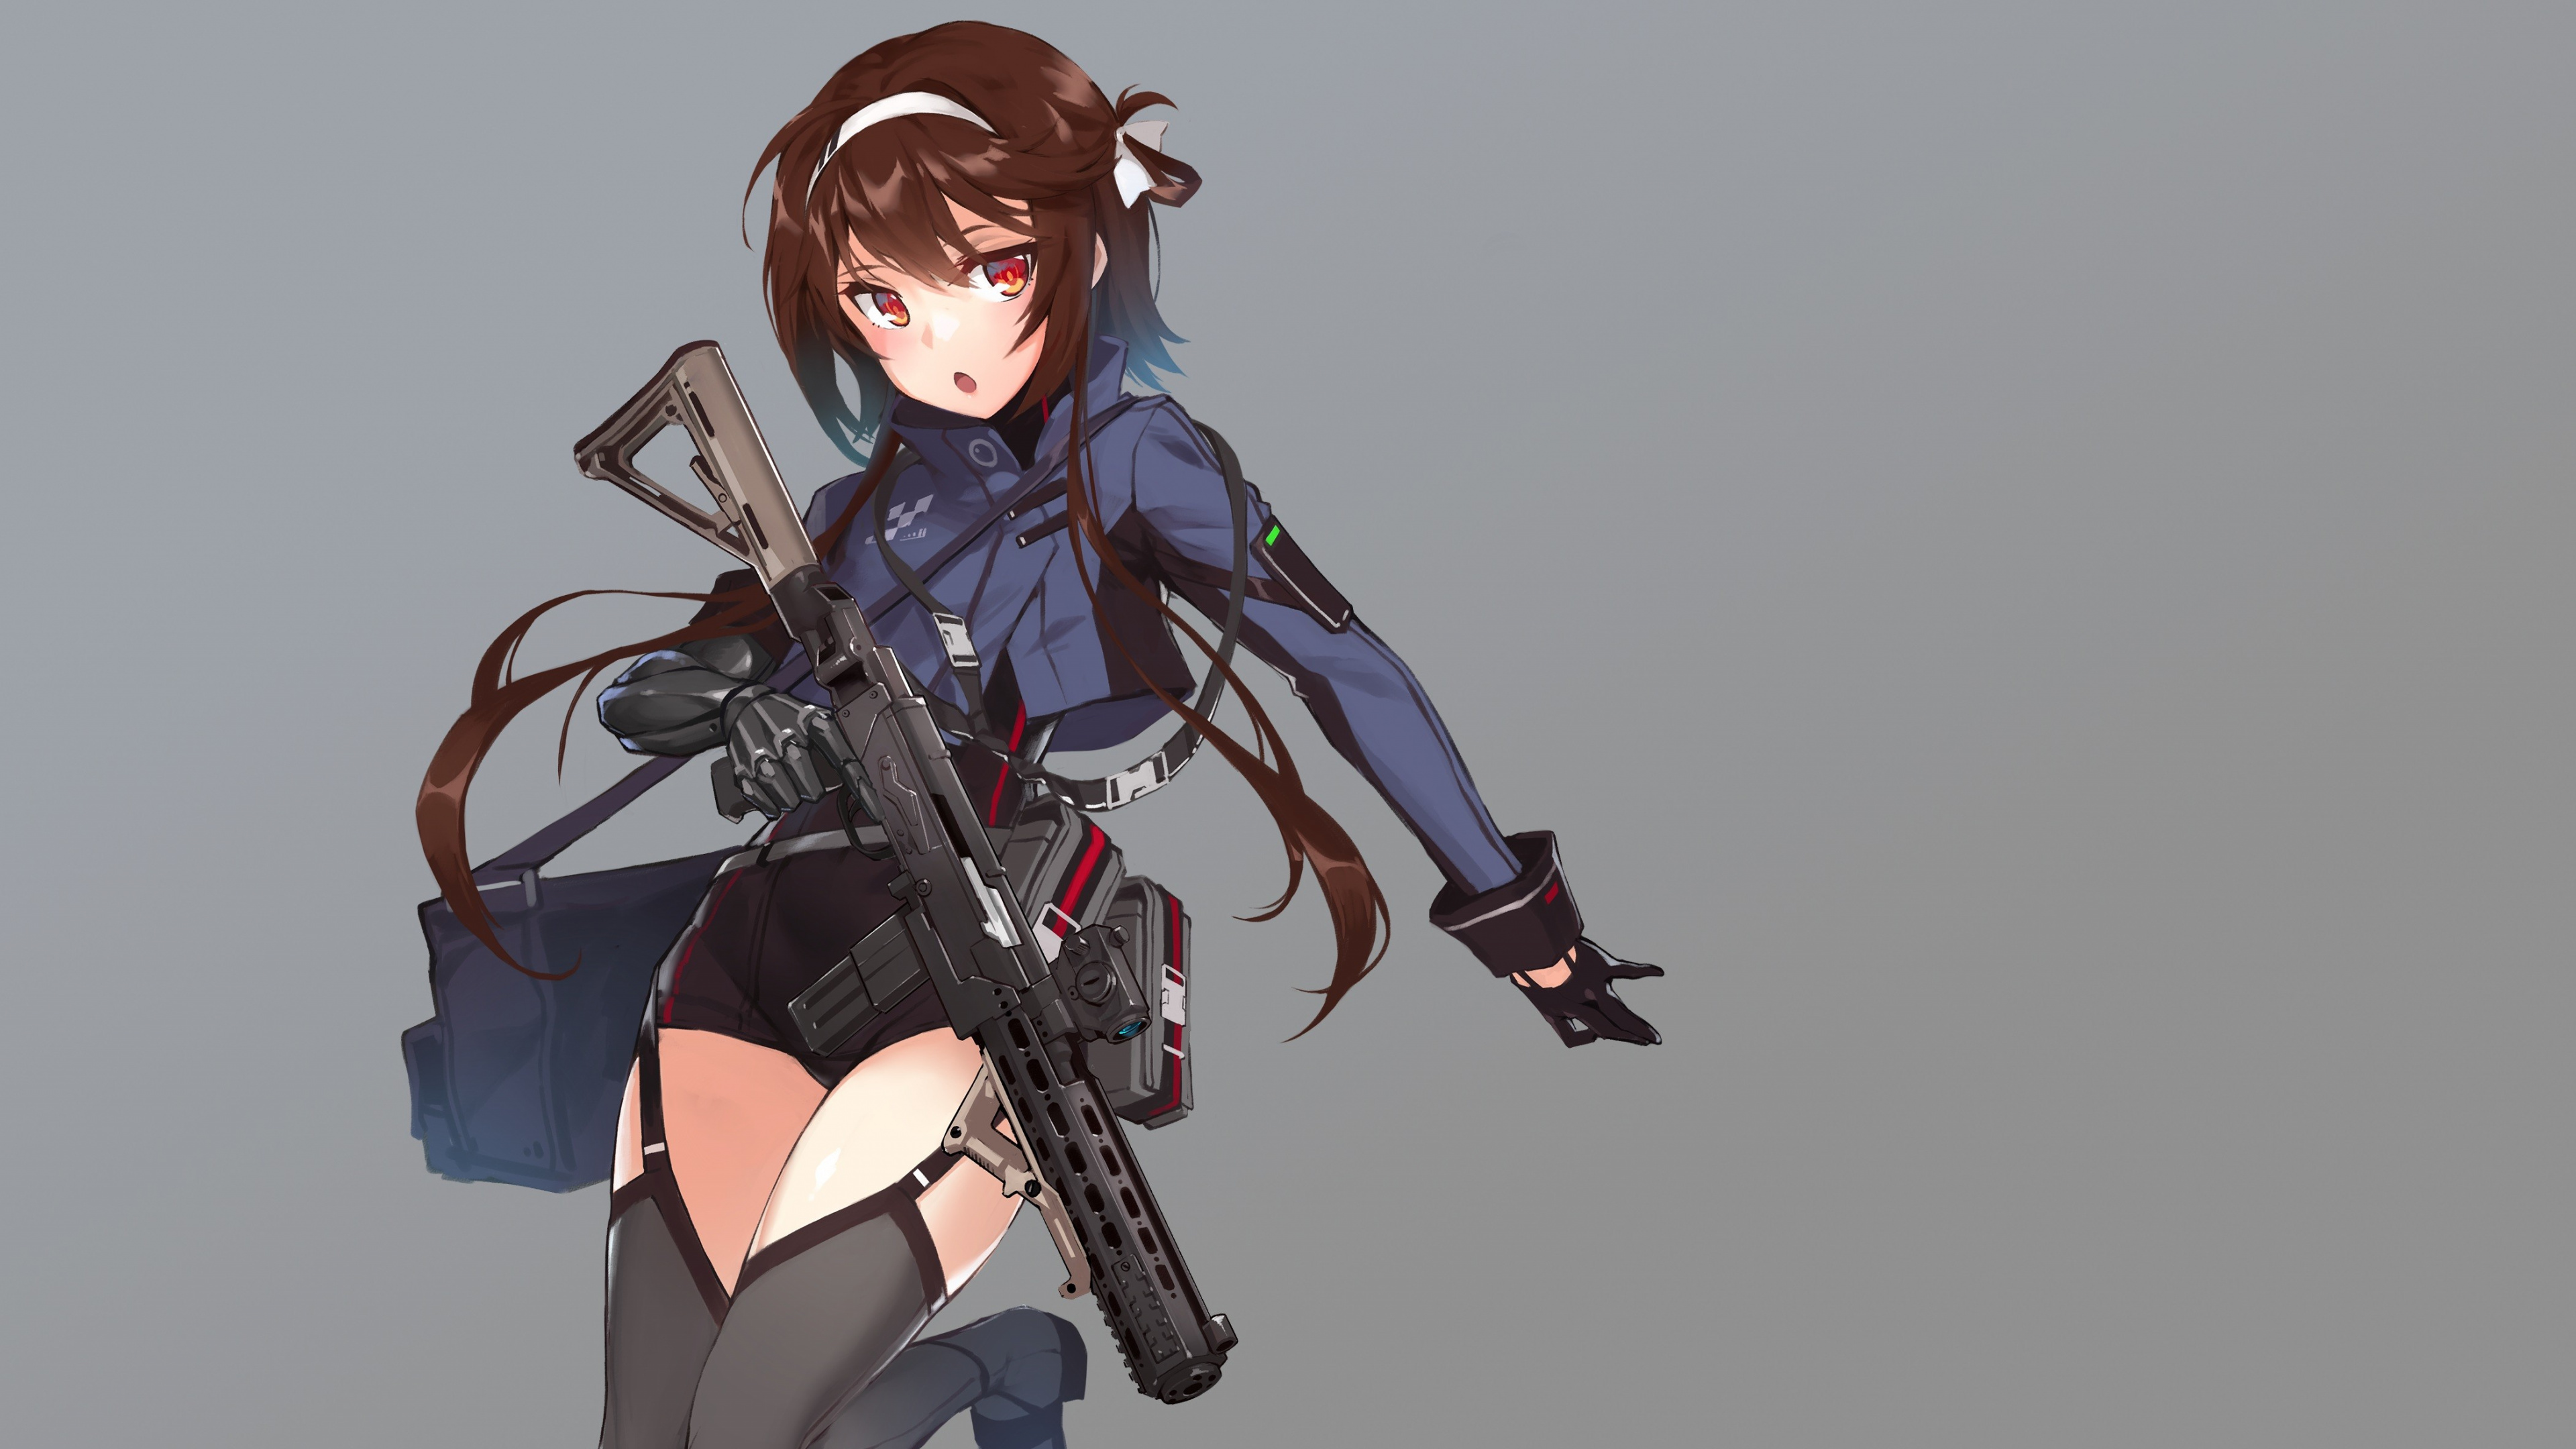 Woman in Blue and Black Dress Holding Rifle Anime Character. Wallpaper in 3840x2160 Resolution